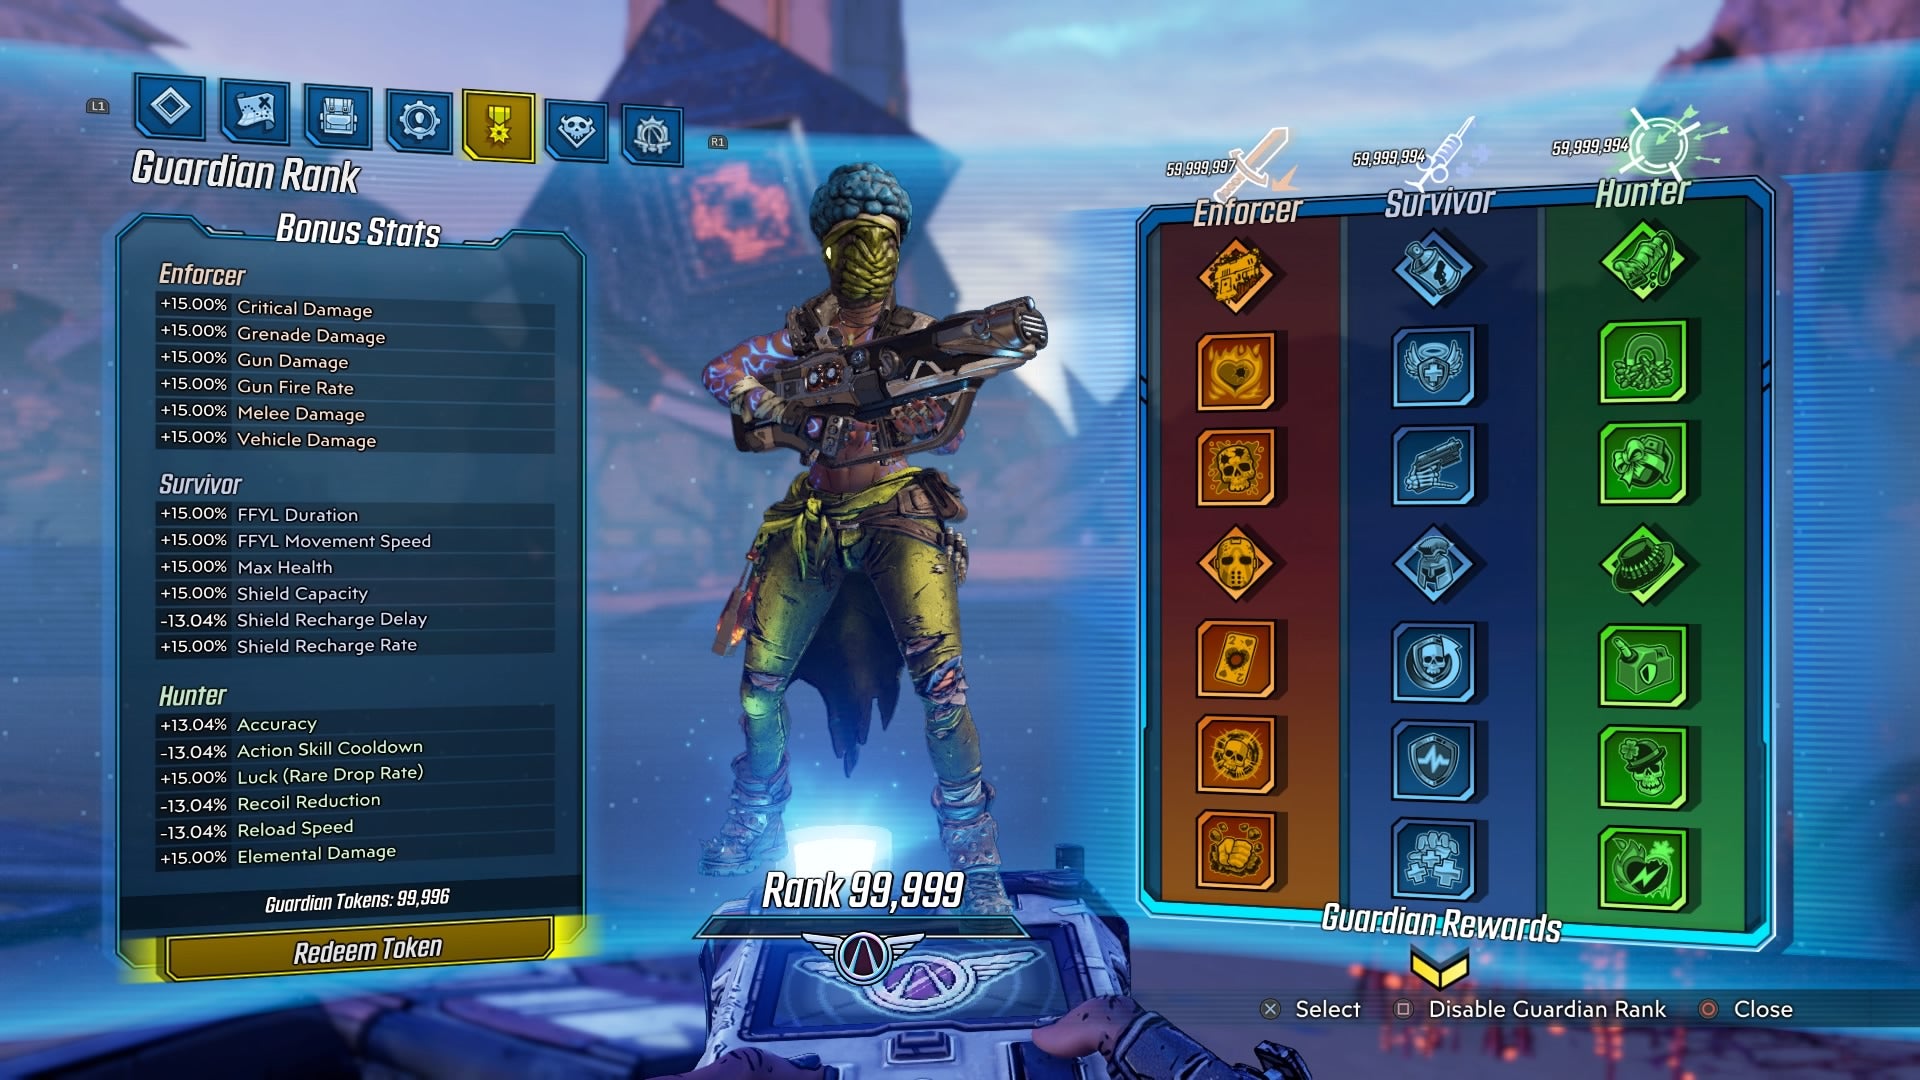 (PS4/PS5) Borderlands 3 Modded Level 72 Character Mayhem 10 Unlocked with Modded Weapons Borderlands 3 Mods Seasonal and Non Seasonal Save Mod - Modded Items and Gear - Hacks - Cheats - Trainers for Playstation 4 - Playstation 5 - Nintendo Switch - Xbox One